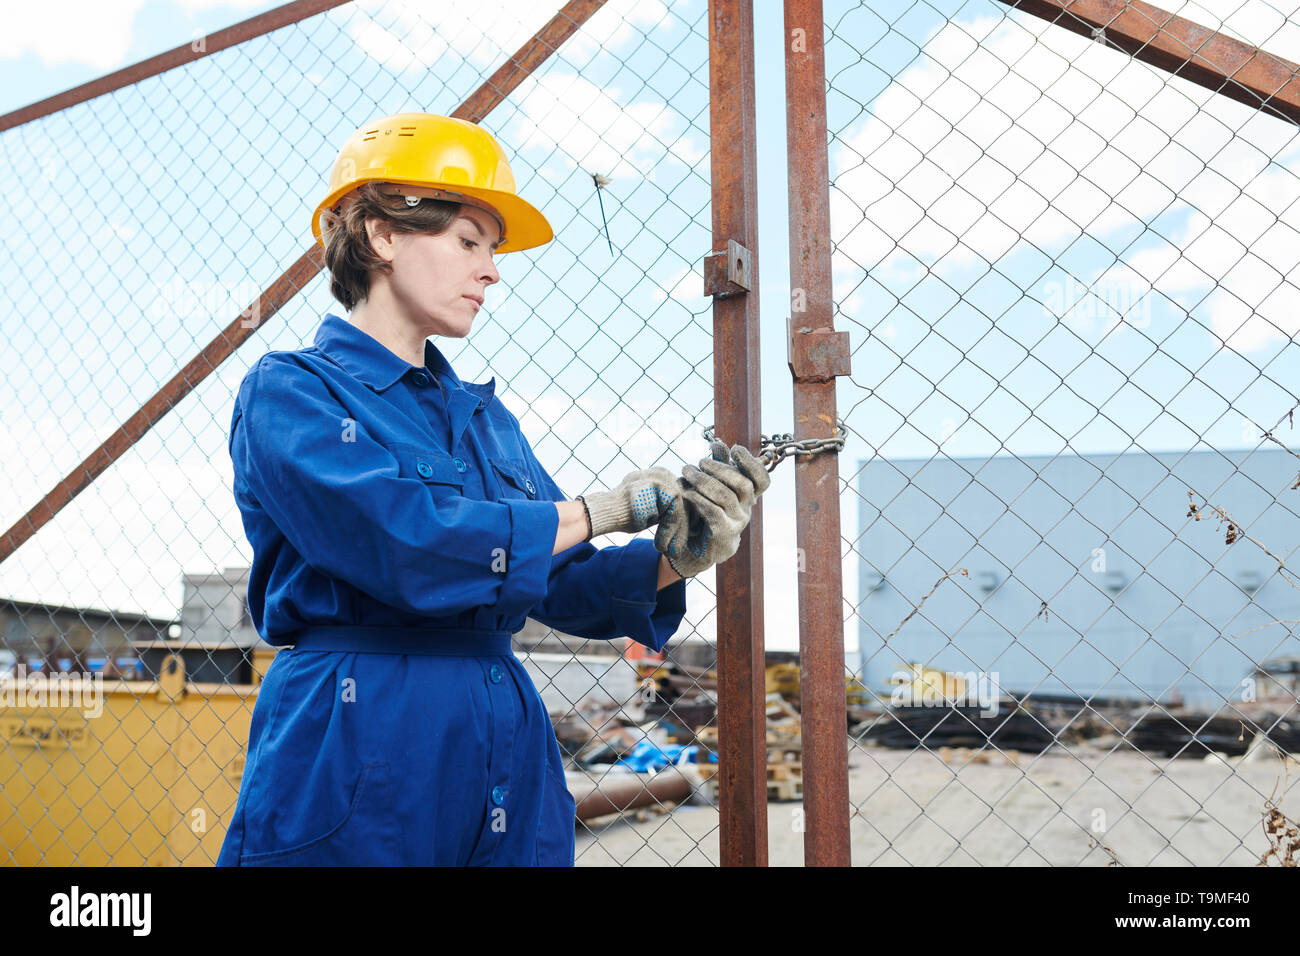 Female Worker Opening Gate Stock Photo